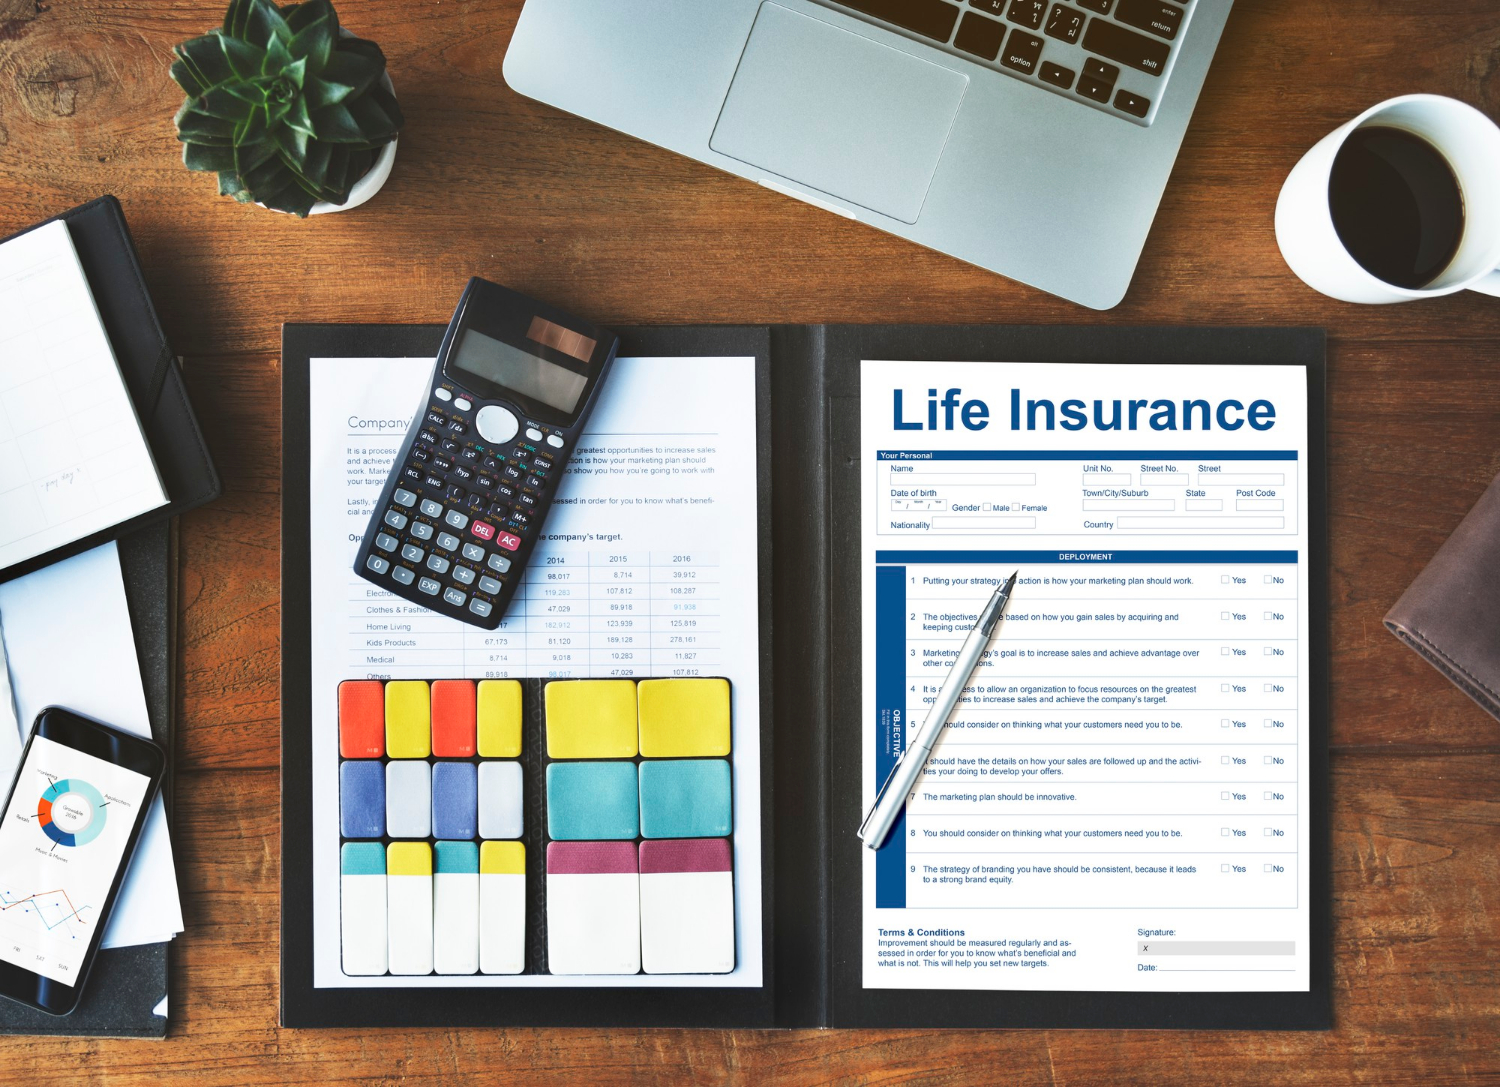 Types of Life Insurance Policies